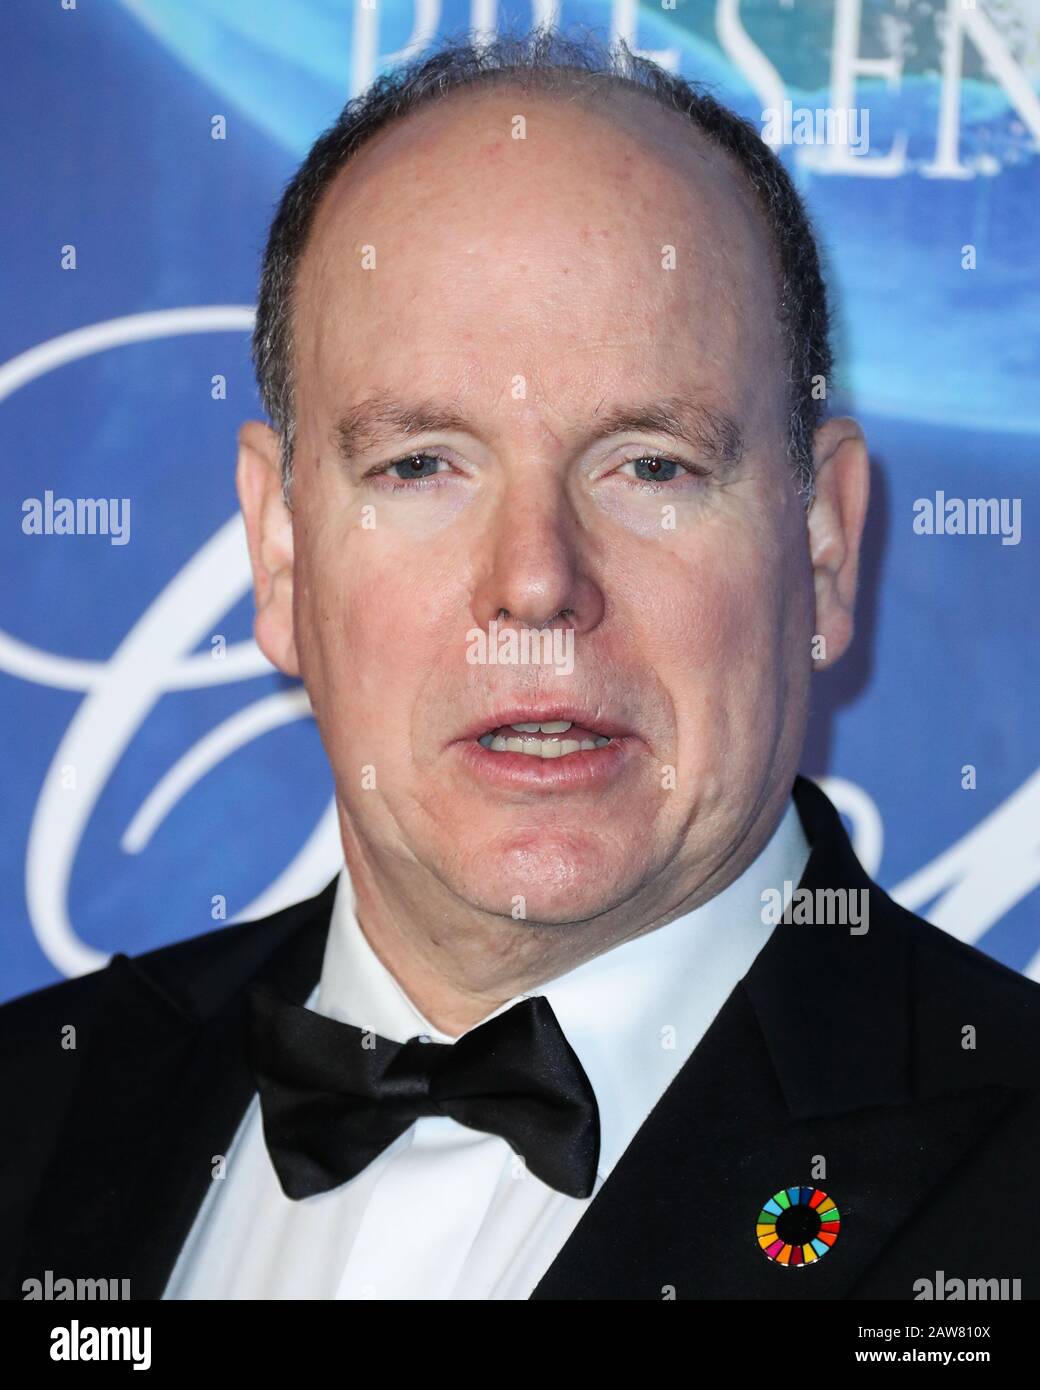 Beverly Hills, United States. 06th Feb, 2020. BEVERLY HILLS, LOS ANGELES, CALIFORNIA, USA - FEBRUARY 06: Prince Albert II arrives at the 2020 Hollywood For The Global Ocean Gala Honoring HSH Prince Albert II Of Monaco held at the Palazzo di Amore on February 6, 2020 in Beverly Hills, Los Angeles, California, United States. (Photo by Xavier Collin/Image Press Agency) Credit: Image Press Agency/Alamy Live News Stock Photo